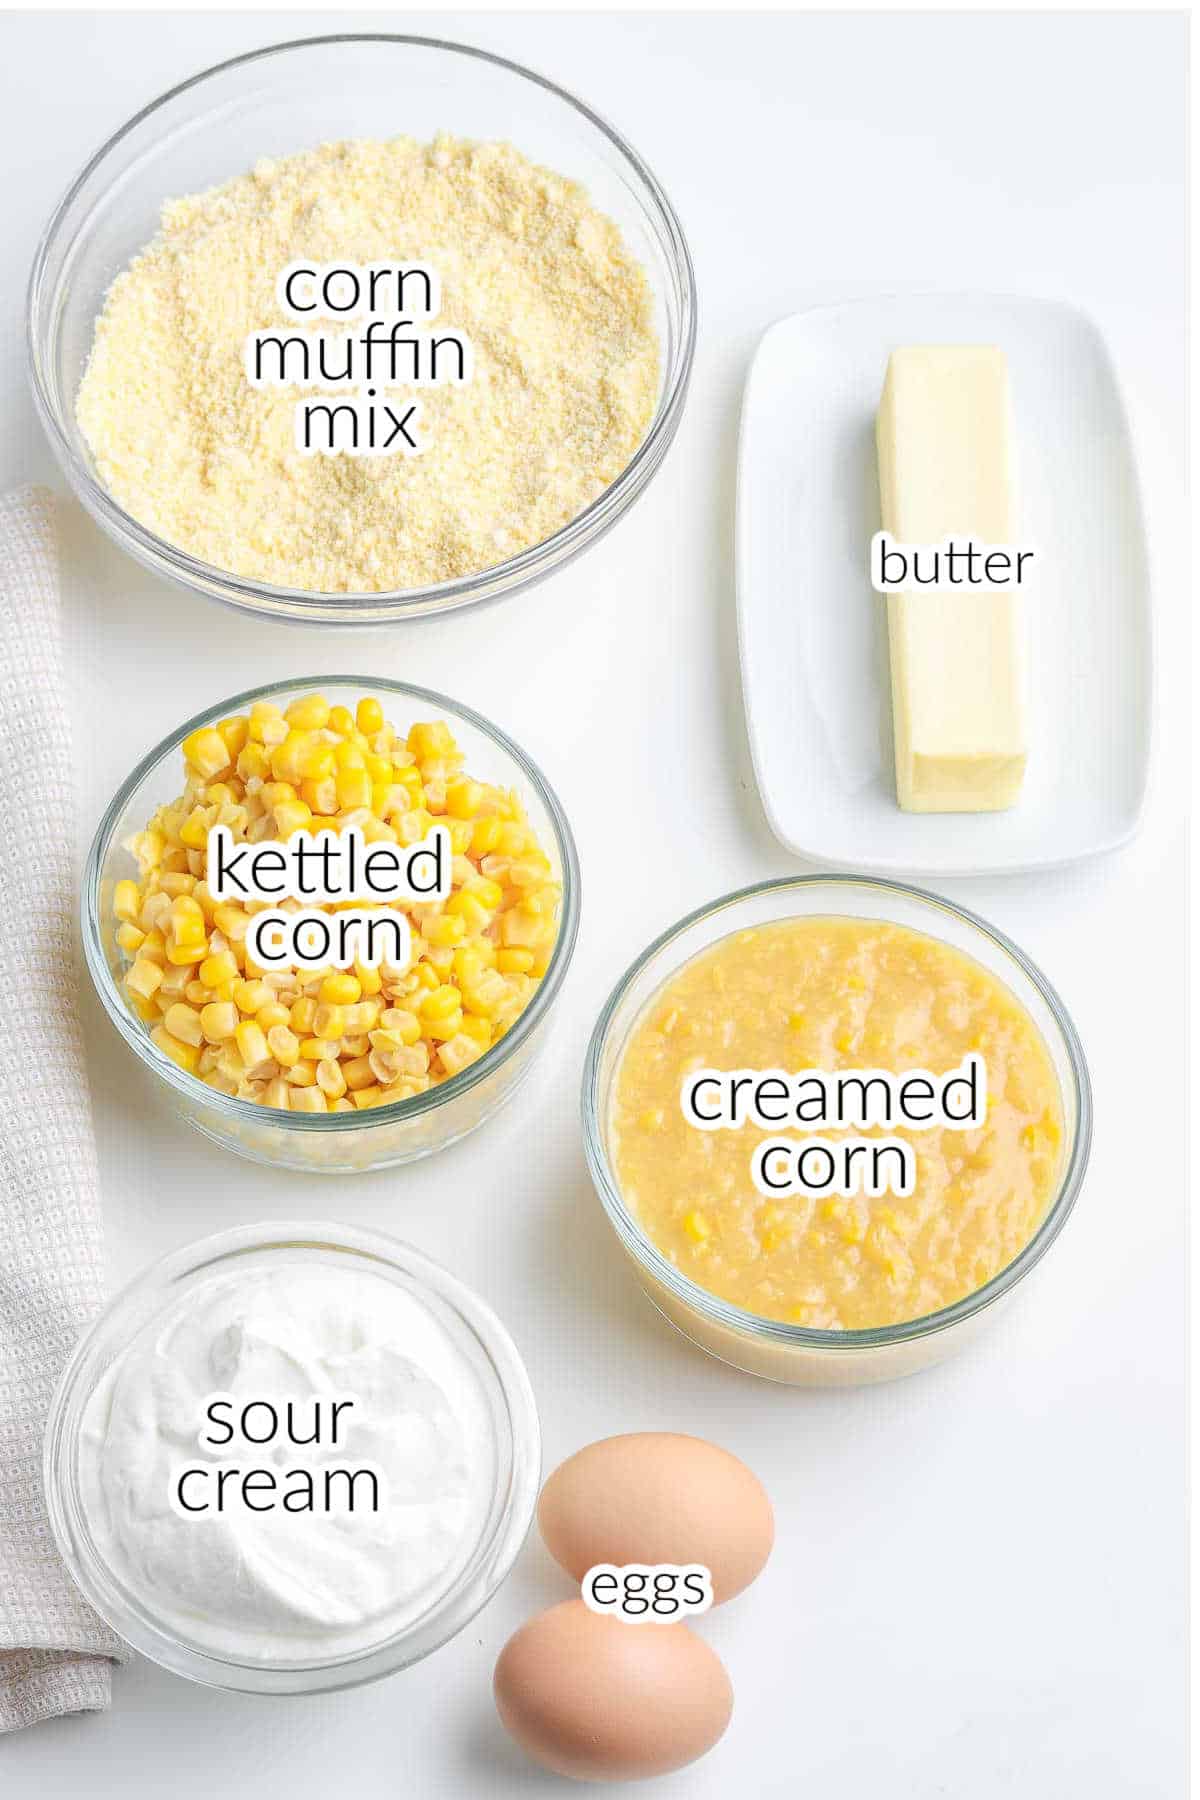 The ingredients for corn casserole - corn muffin mix, eggs, butter, creamed corn, kettled corn and sour cream.